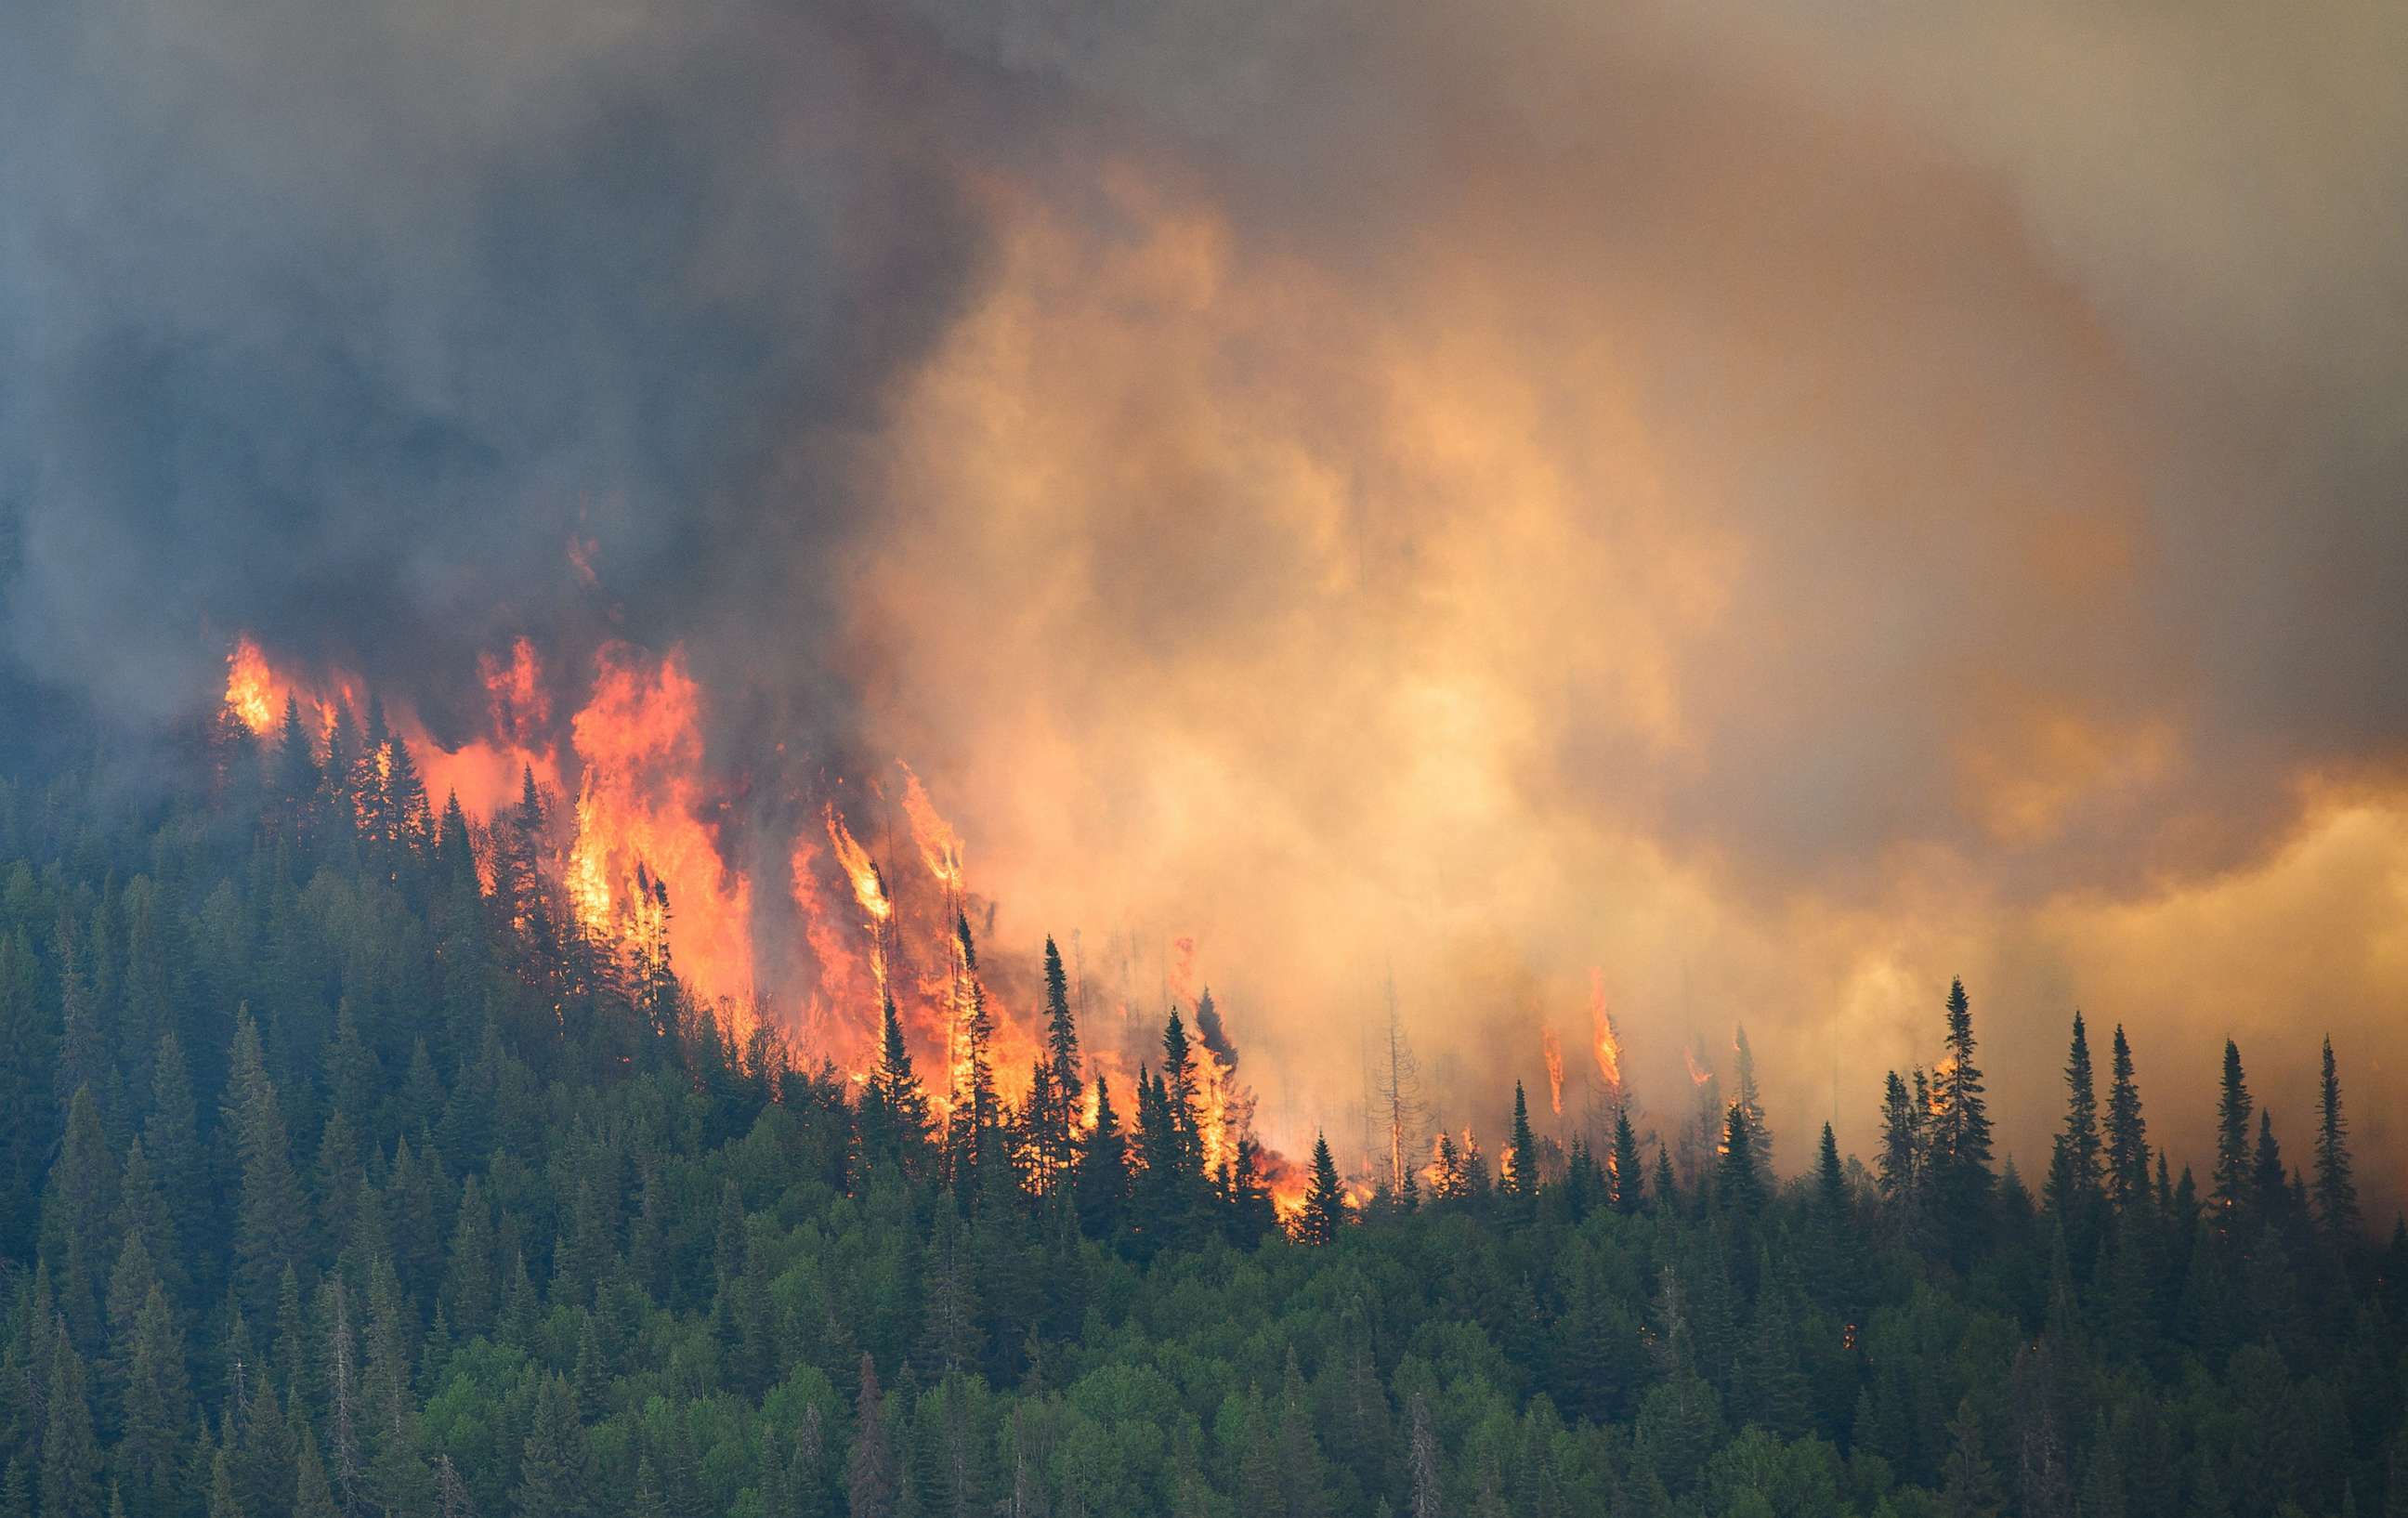 PHOTO: Flames reach upwards along the edge of a wildfire as seen from a Canadian Forces helicopter surveying the area near Mistissini, Quebec, Canada, June 12, 2023.